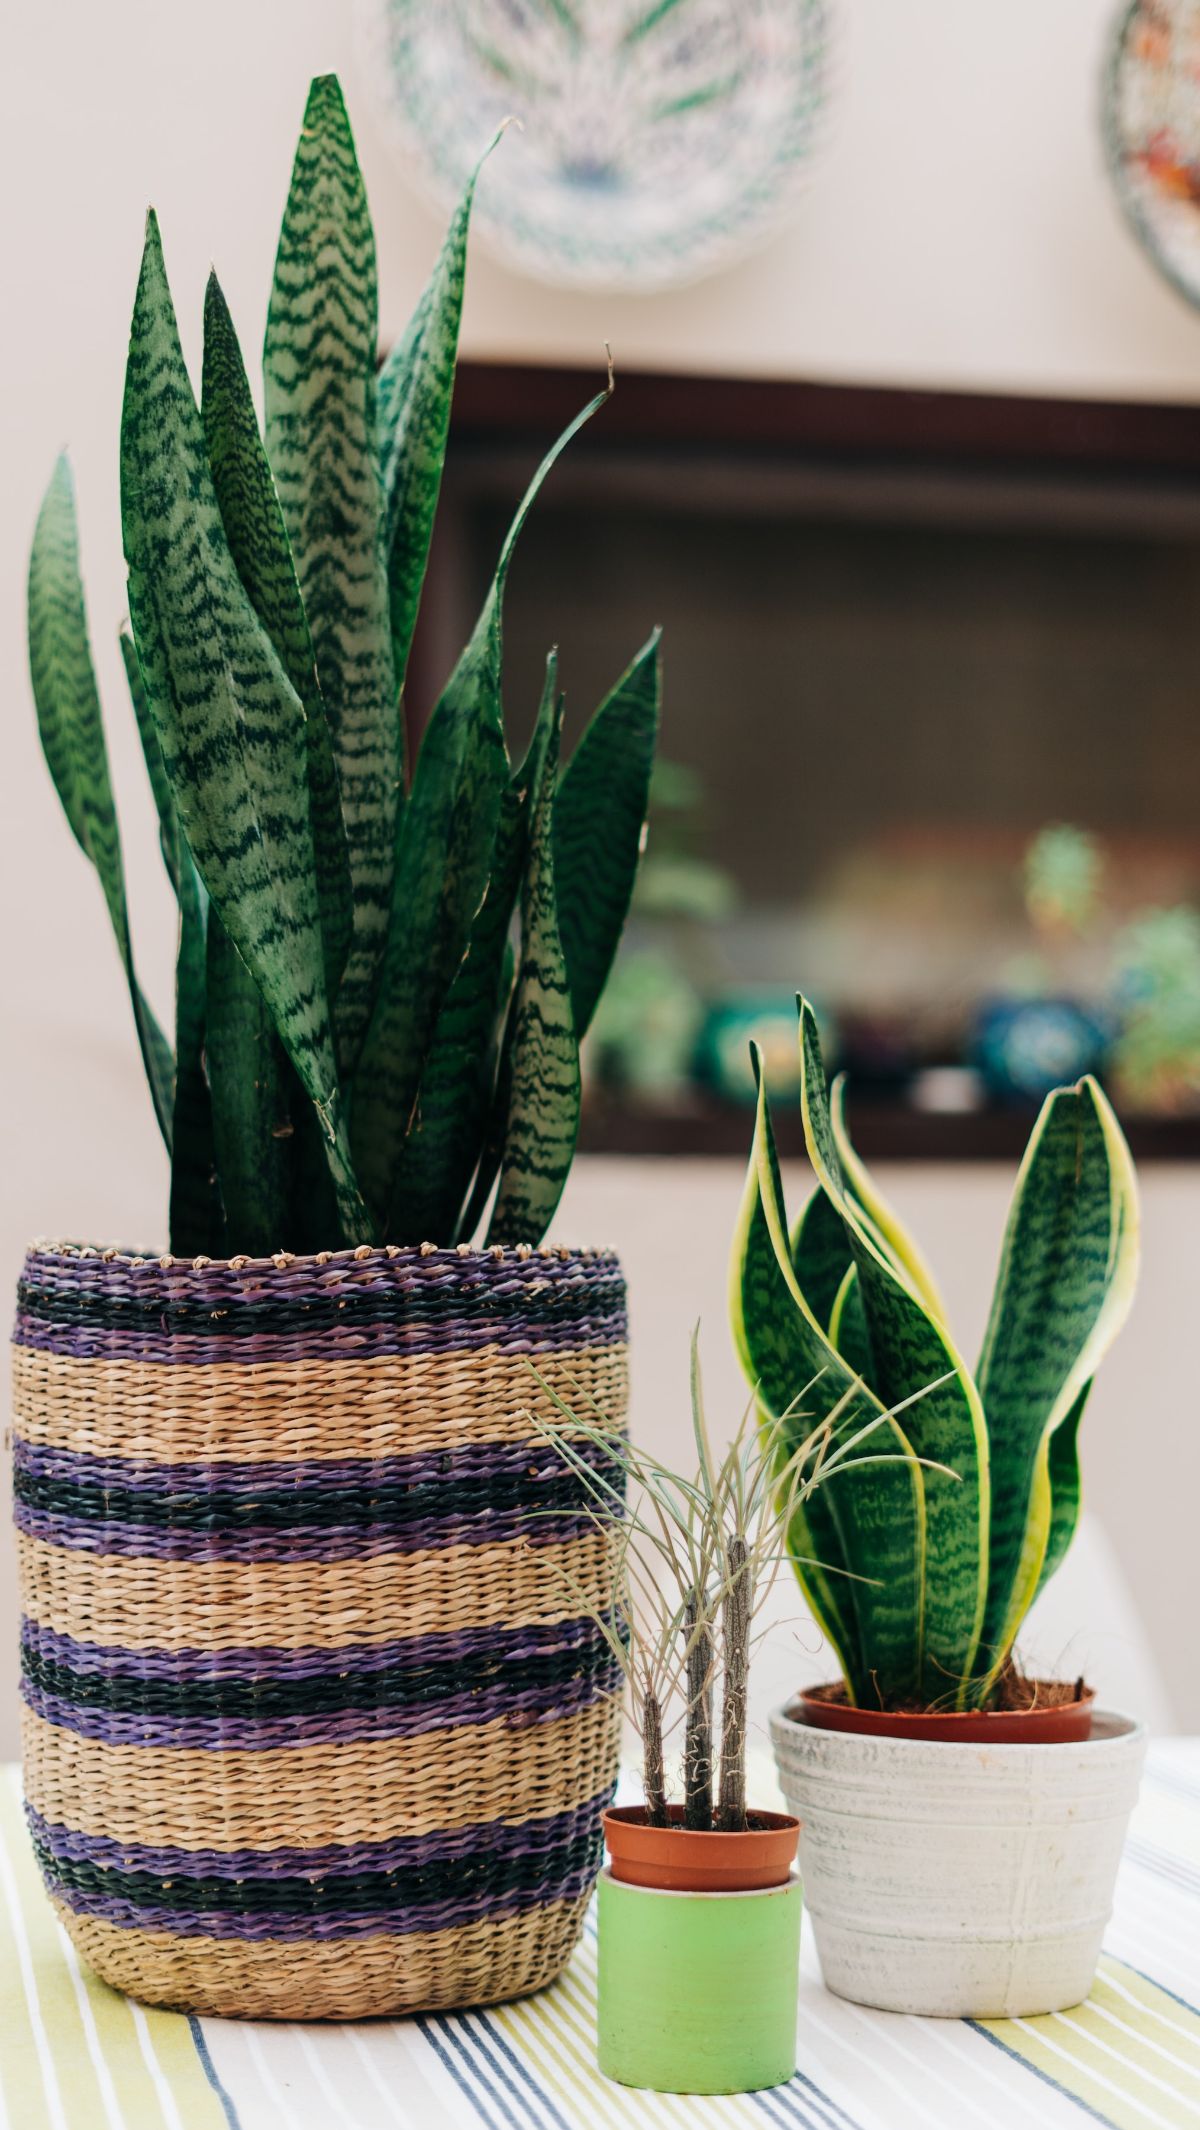 1. Snake Plant (Sansevieria trifasciata)<div><br></div><div>Snake Plant has been nicknamed the 'mother-in-law's tongue.' The Snake Plant is a powerhouse for improving indoor air quality.</div><div><br></div><div>Photo: gabriella-clare-marino-unsplash</div>